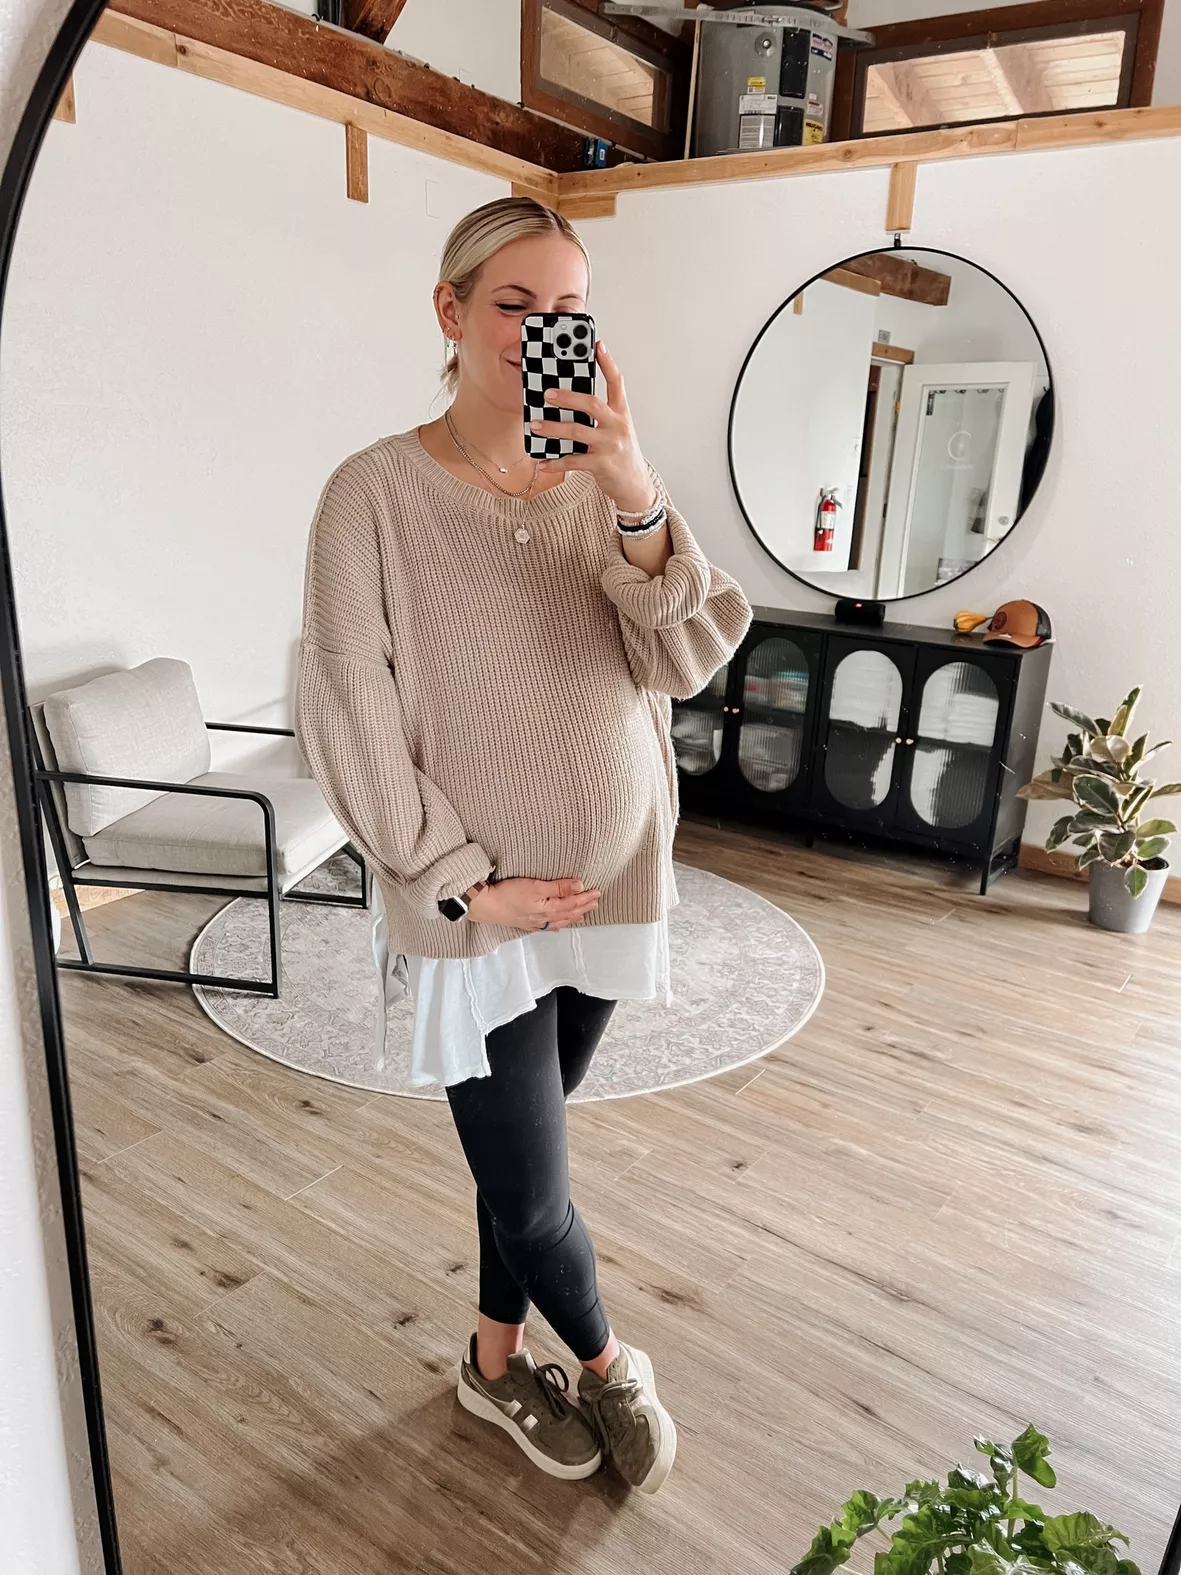 Styling tips for maternity leggings. Be cute and comfy during